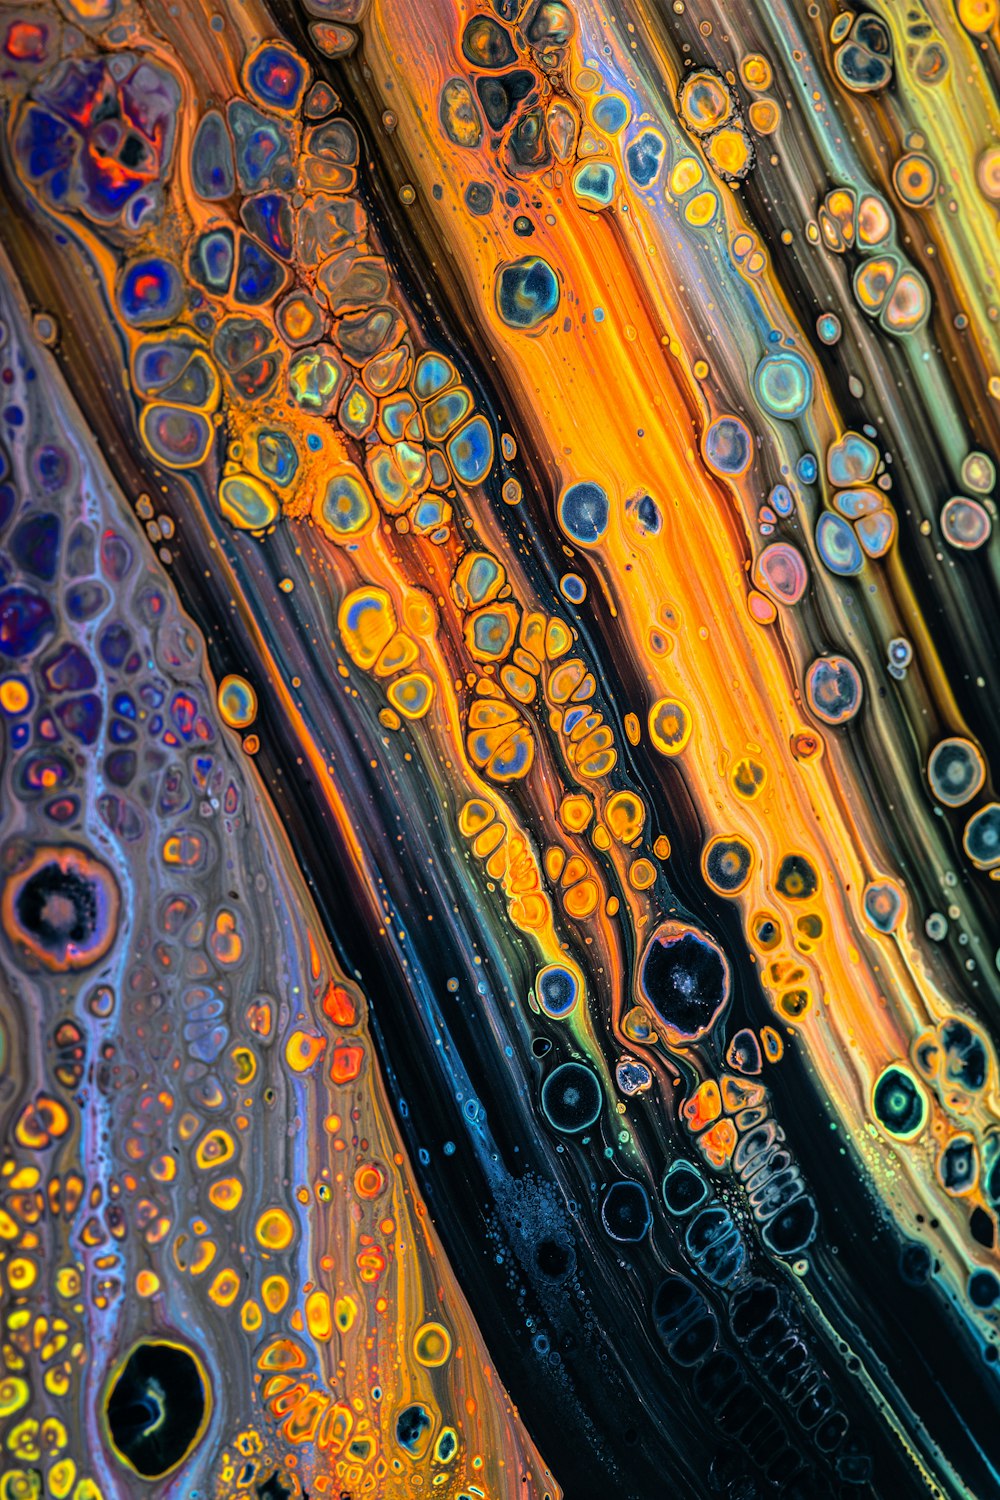 a close up of a colorful liquid filled with bubbles